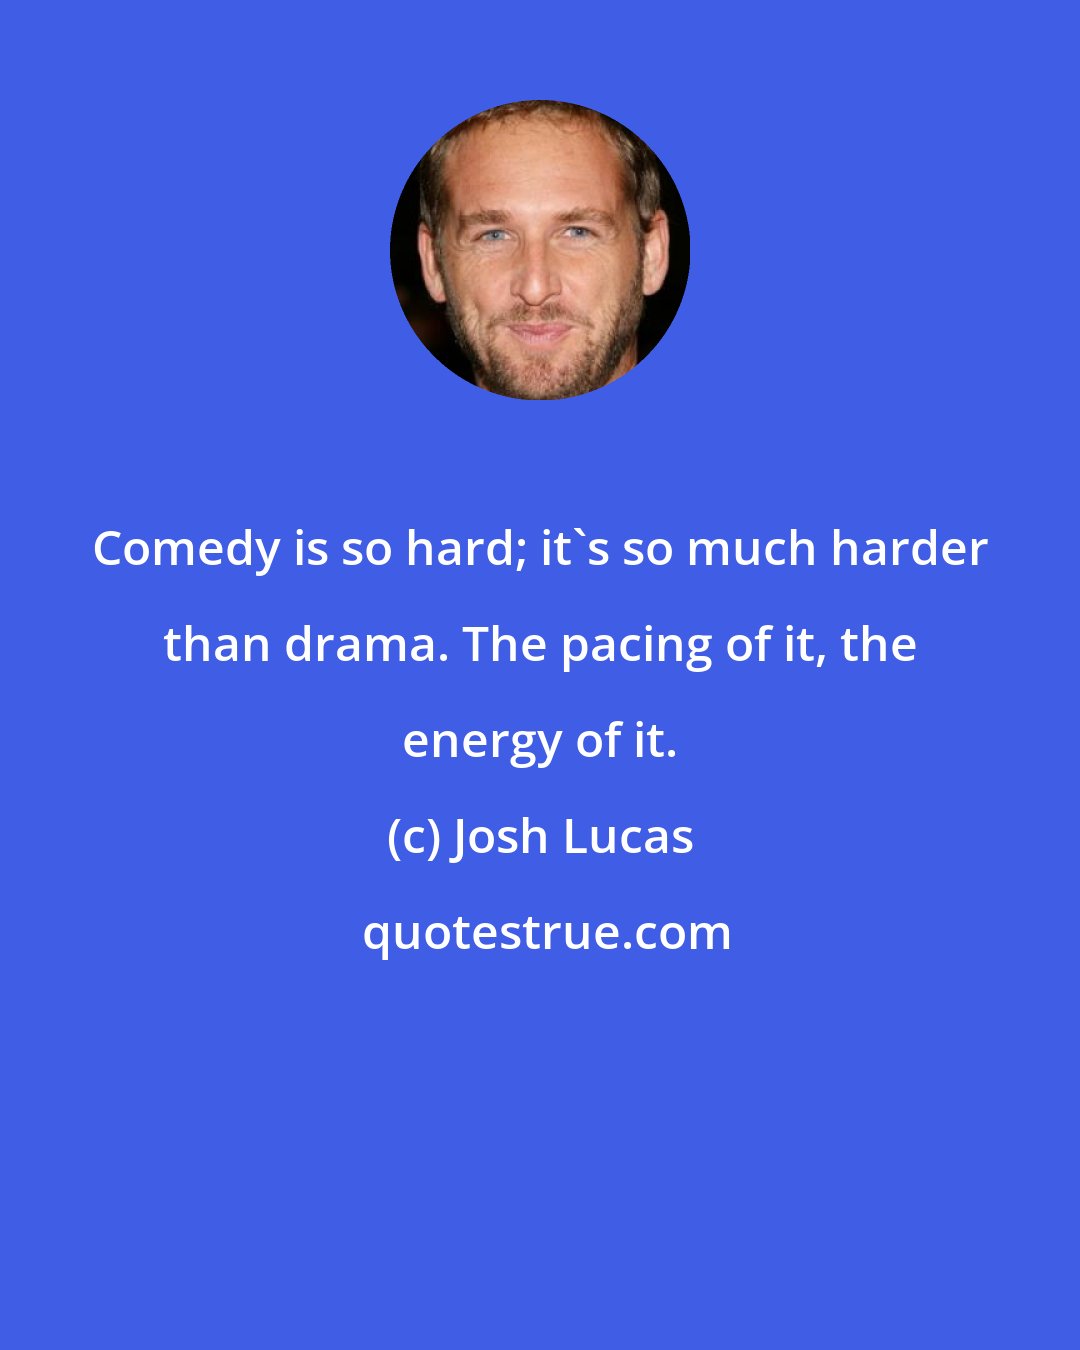 Josh Lucas: Comedy is so hard; it's so much harder than drama. The pacing of it, the energy of it.